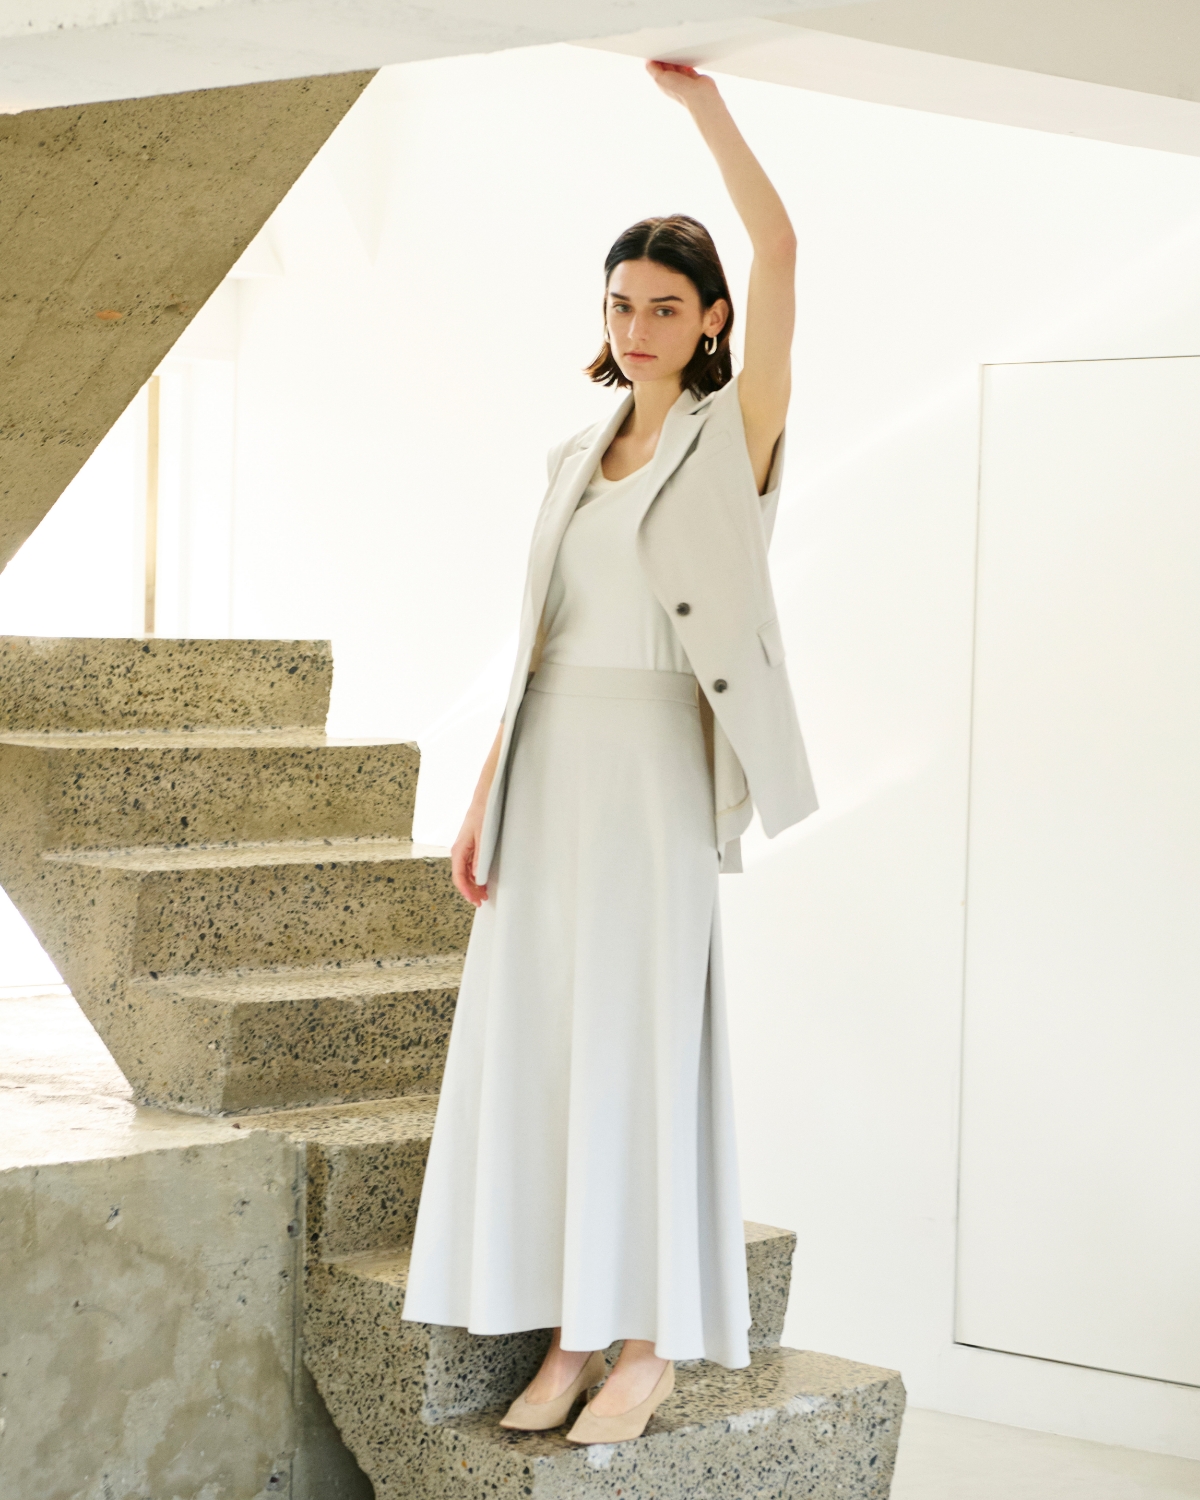 Not Just Comfort Linen for the City LINEN OX Collectionを着用している女性モデル07